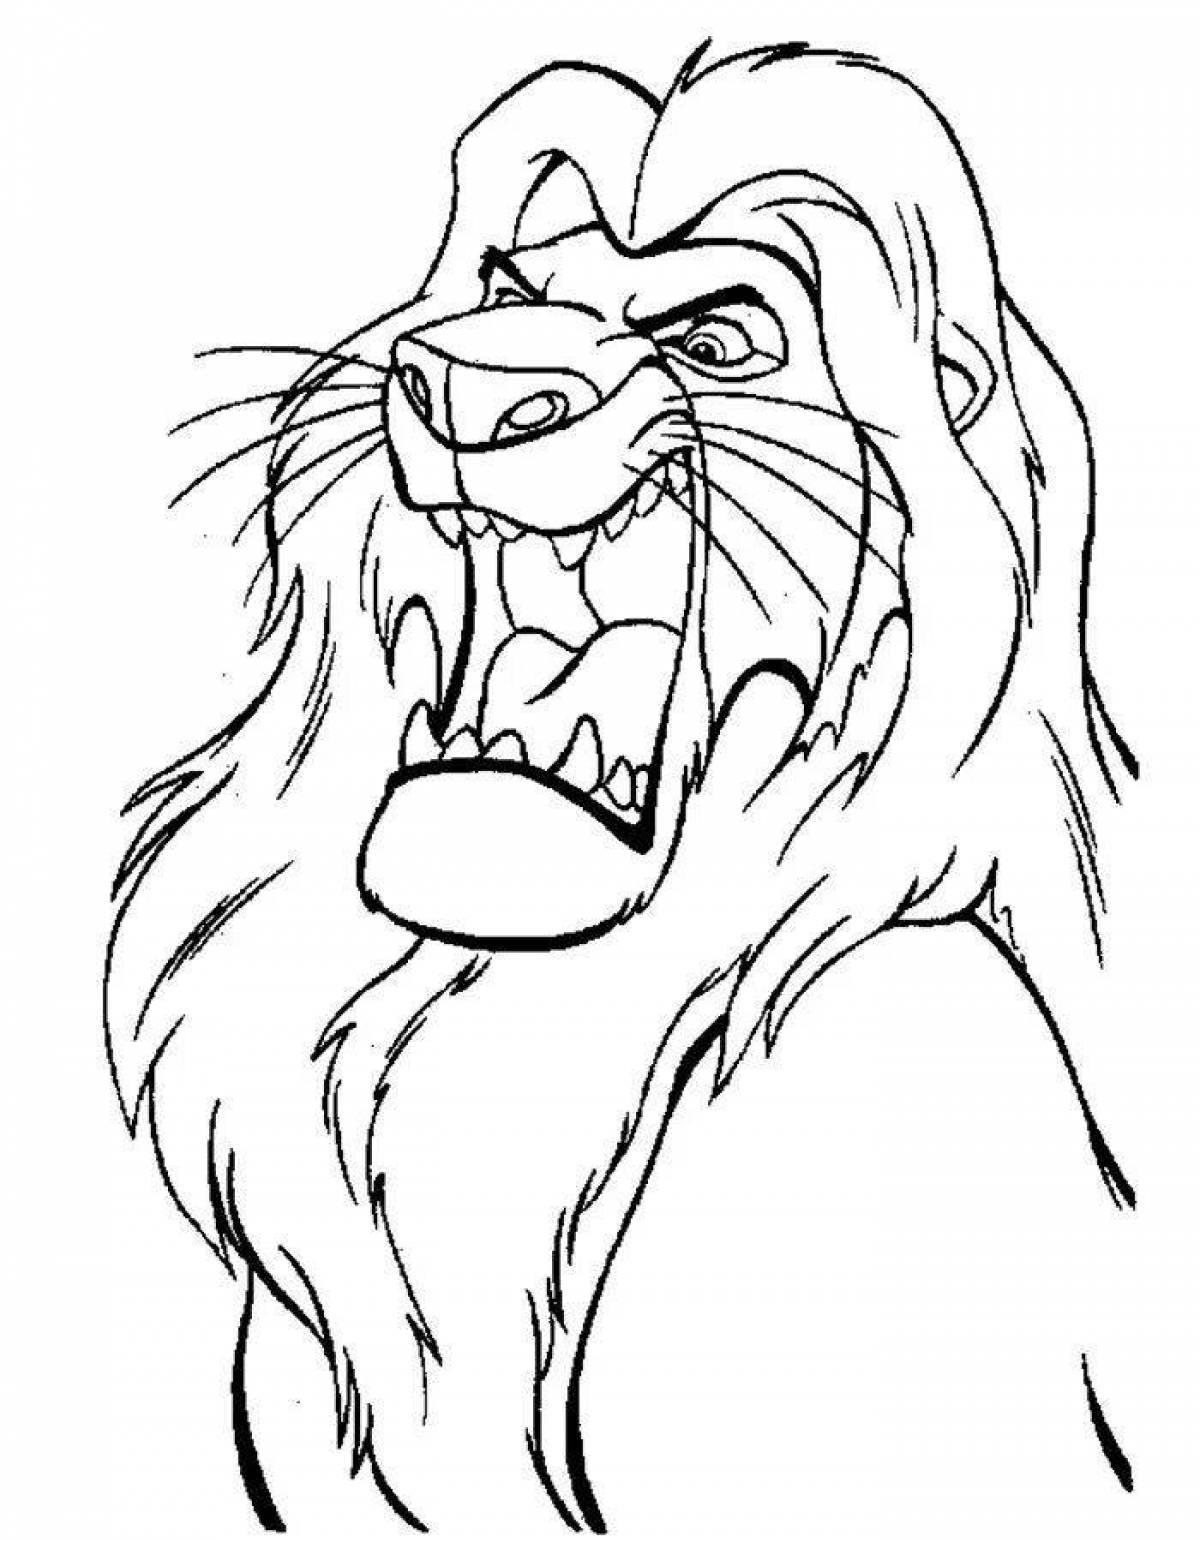 Coloring book glowing lion king